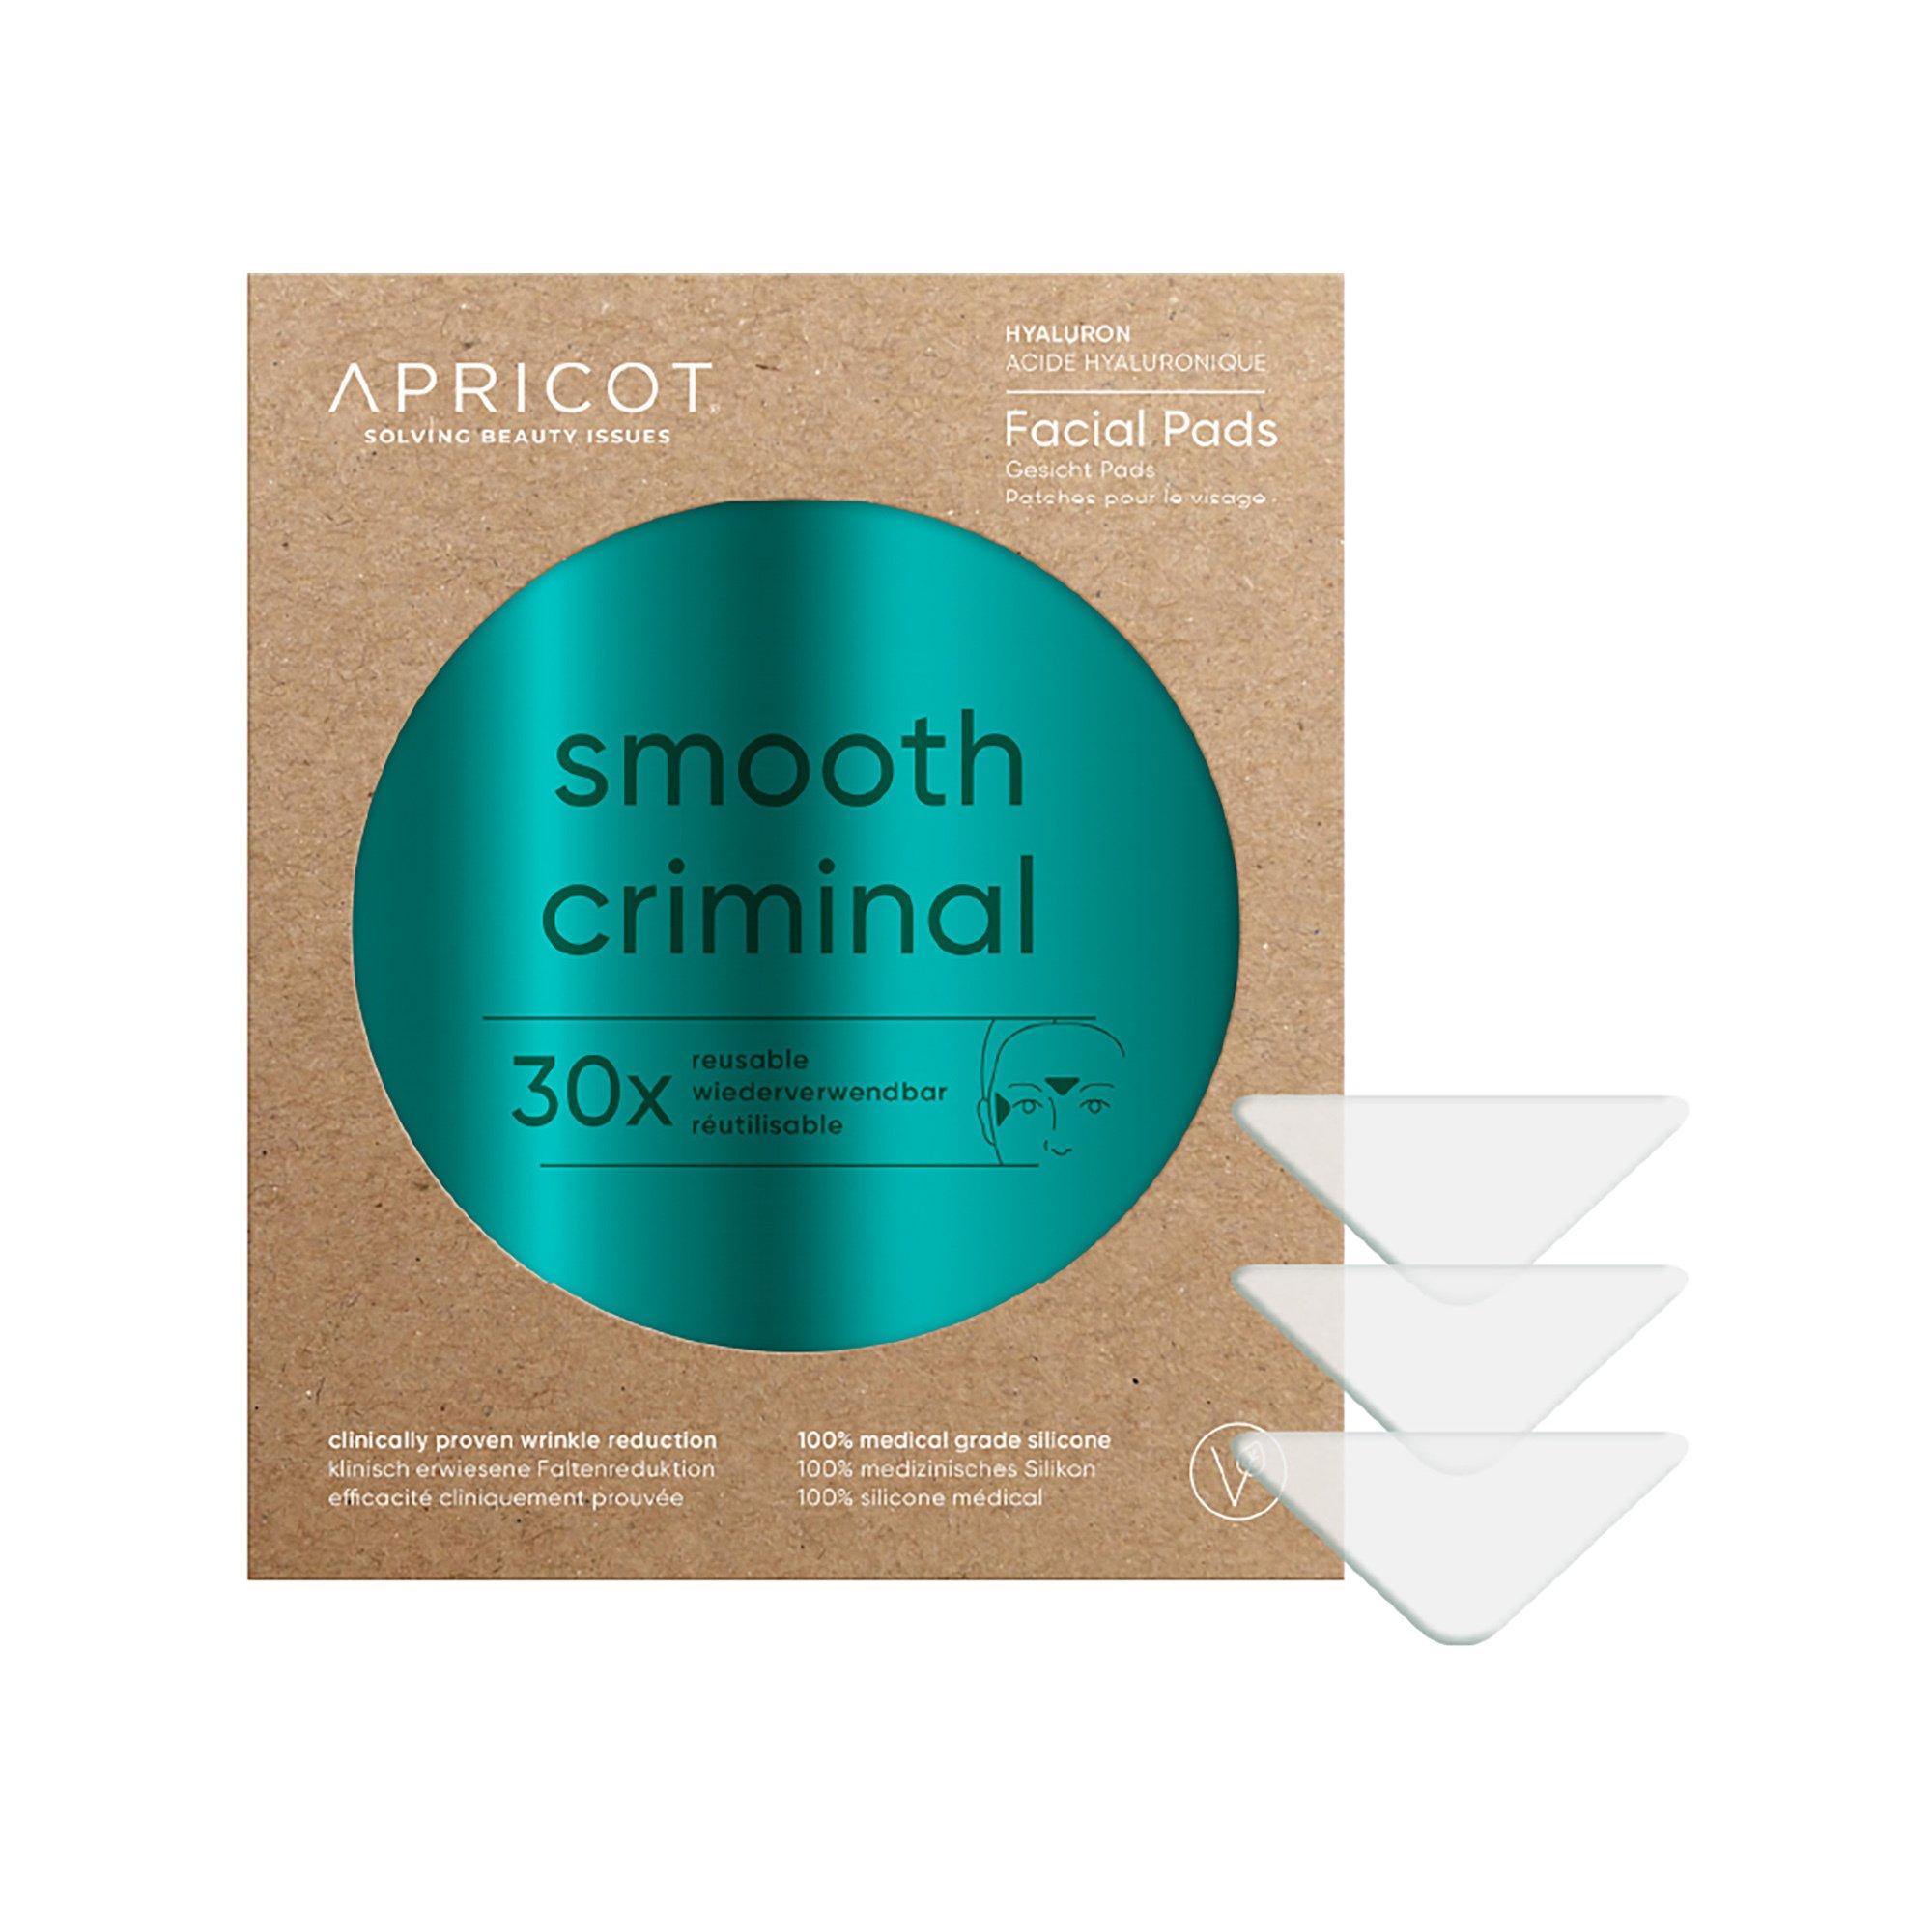 Image of APRICOT Facial Pads Hyaluron "Smooth Criminal" - 3 pezzi